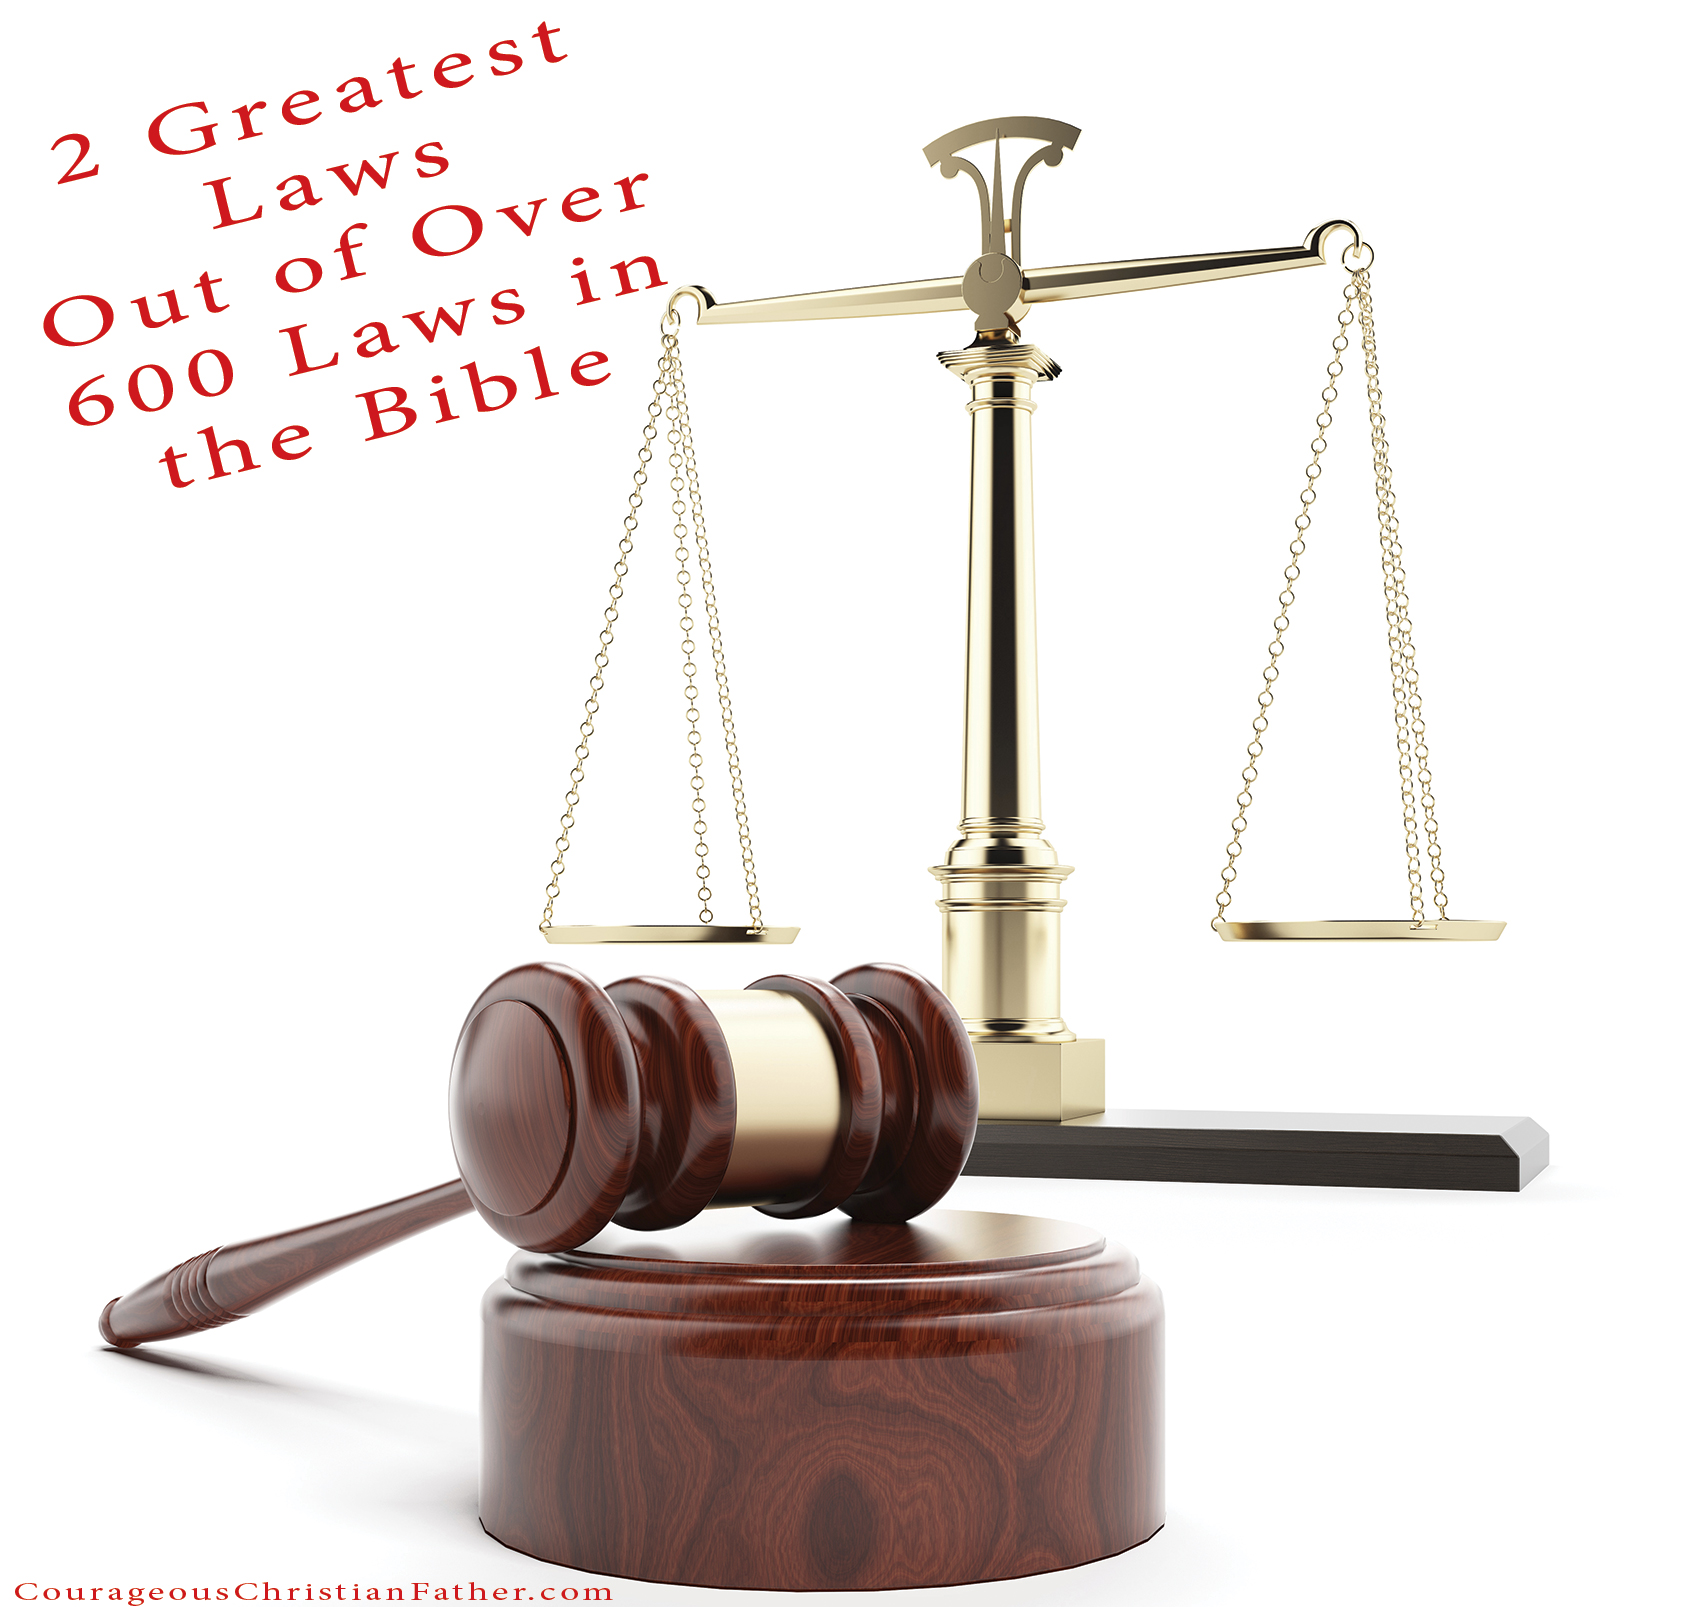 2 Greatest Laws out of over 600 Laws in the Bible